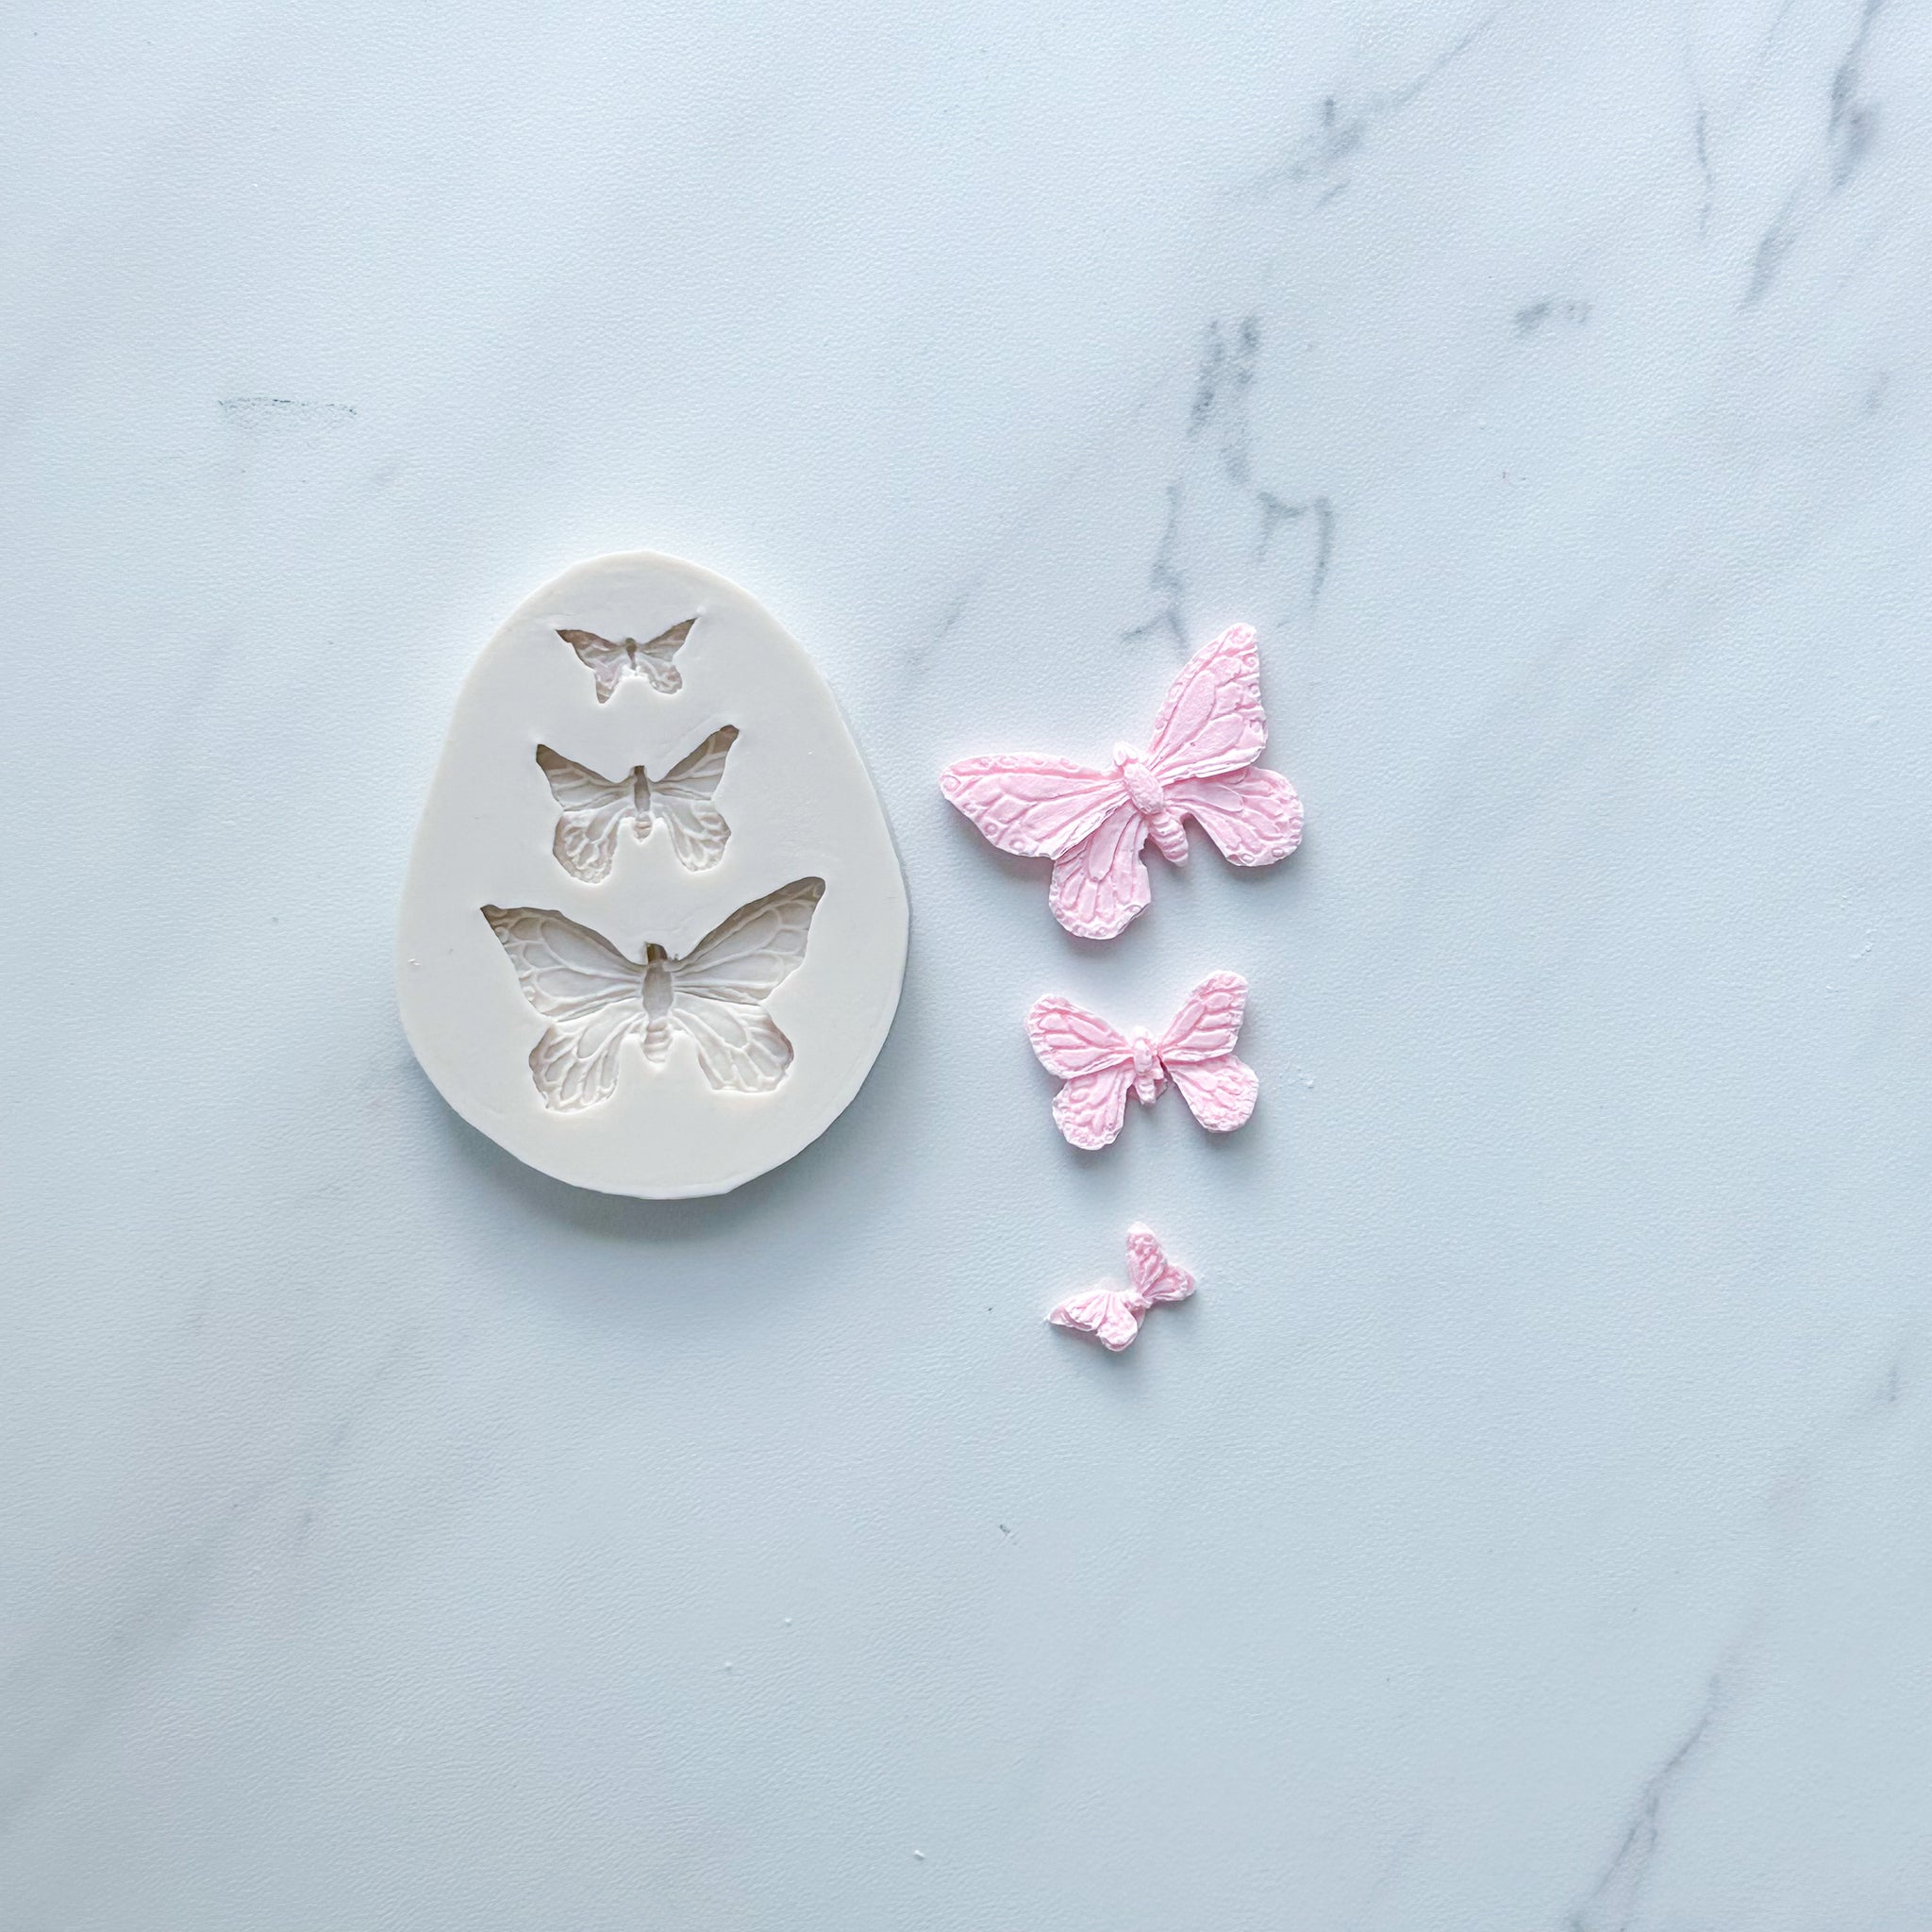 CHELLYBERRIES BUTTERFLY MOLD